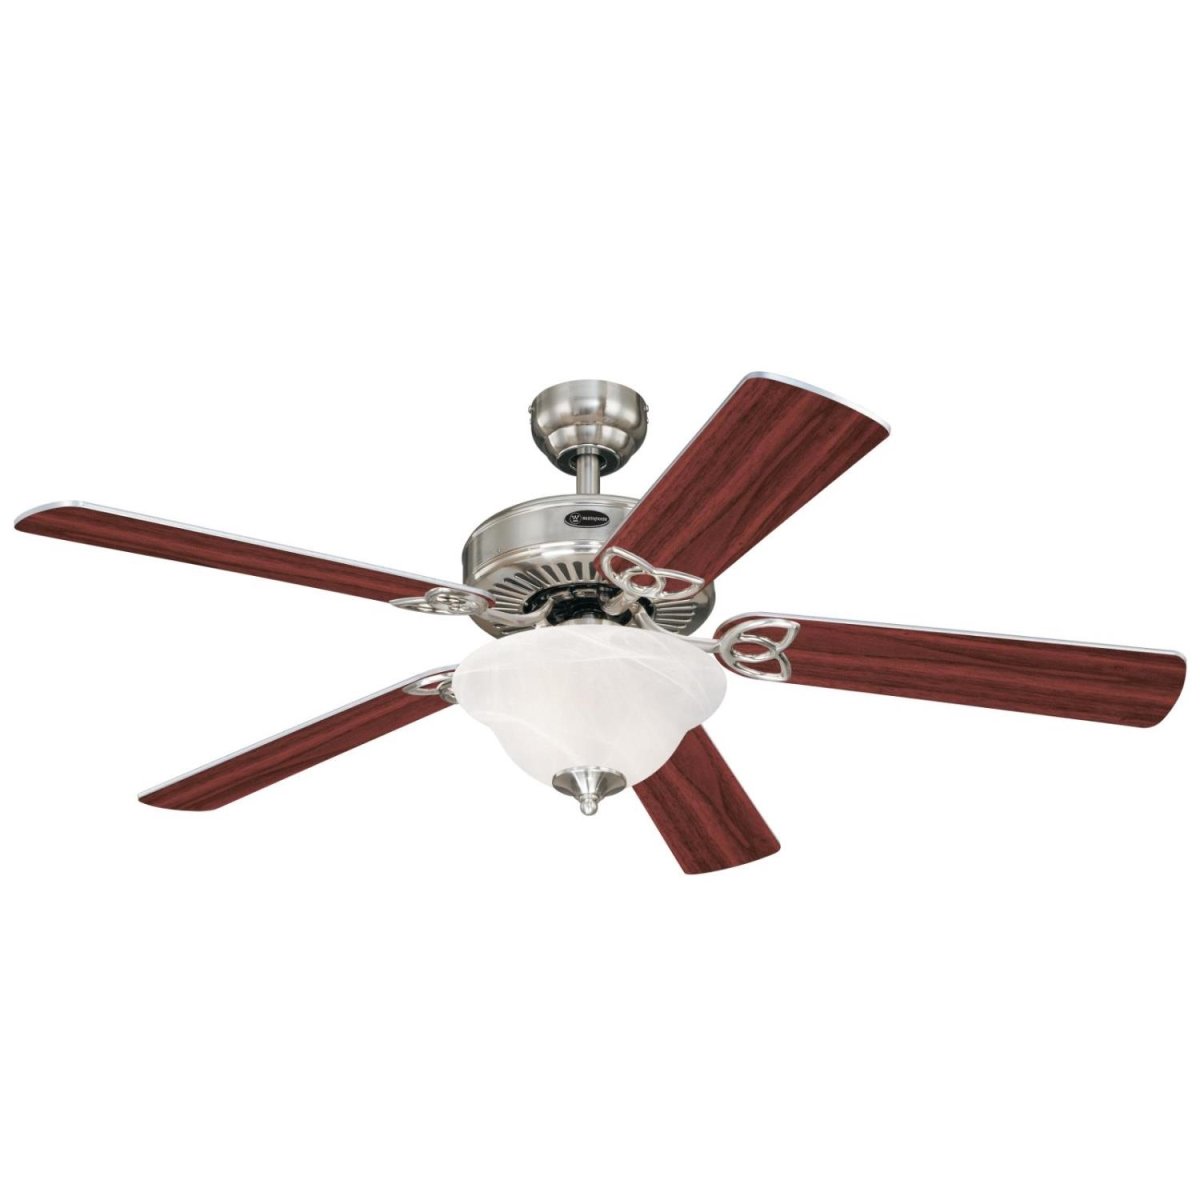 Picture of Westinghouse 7234900 52 in. Ceiling Fan with LED Light Fixture Brushed Nickel Finish Reversible Blades Rosewood & Light Maple White Alabaster Glass